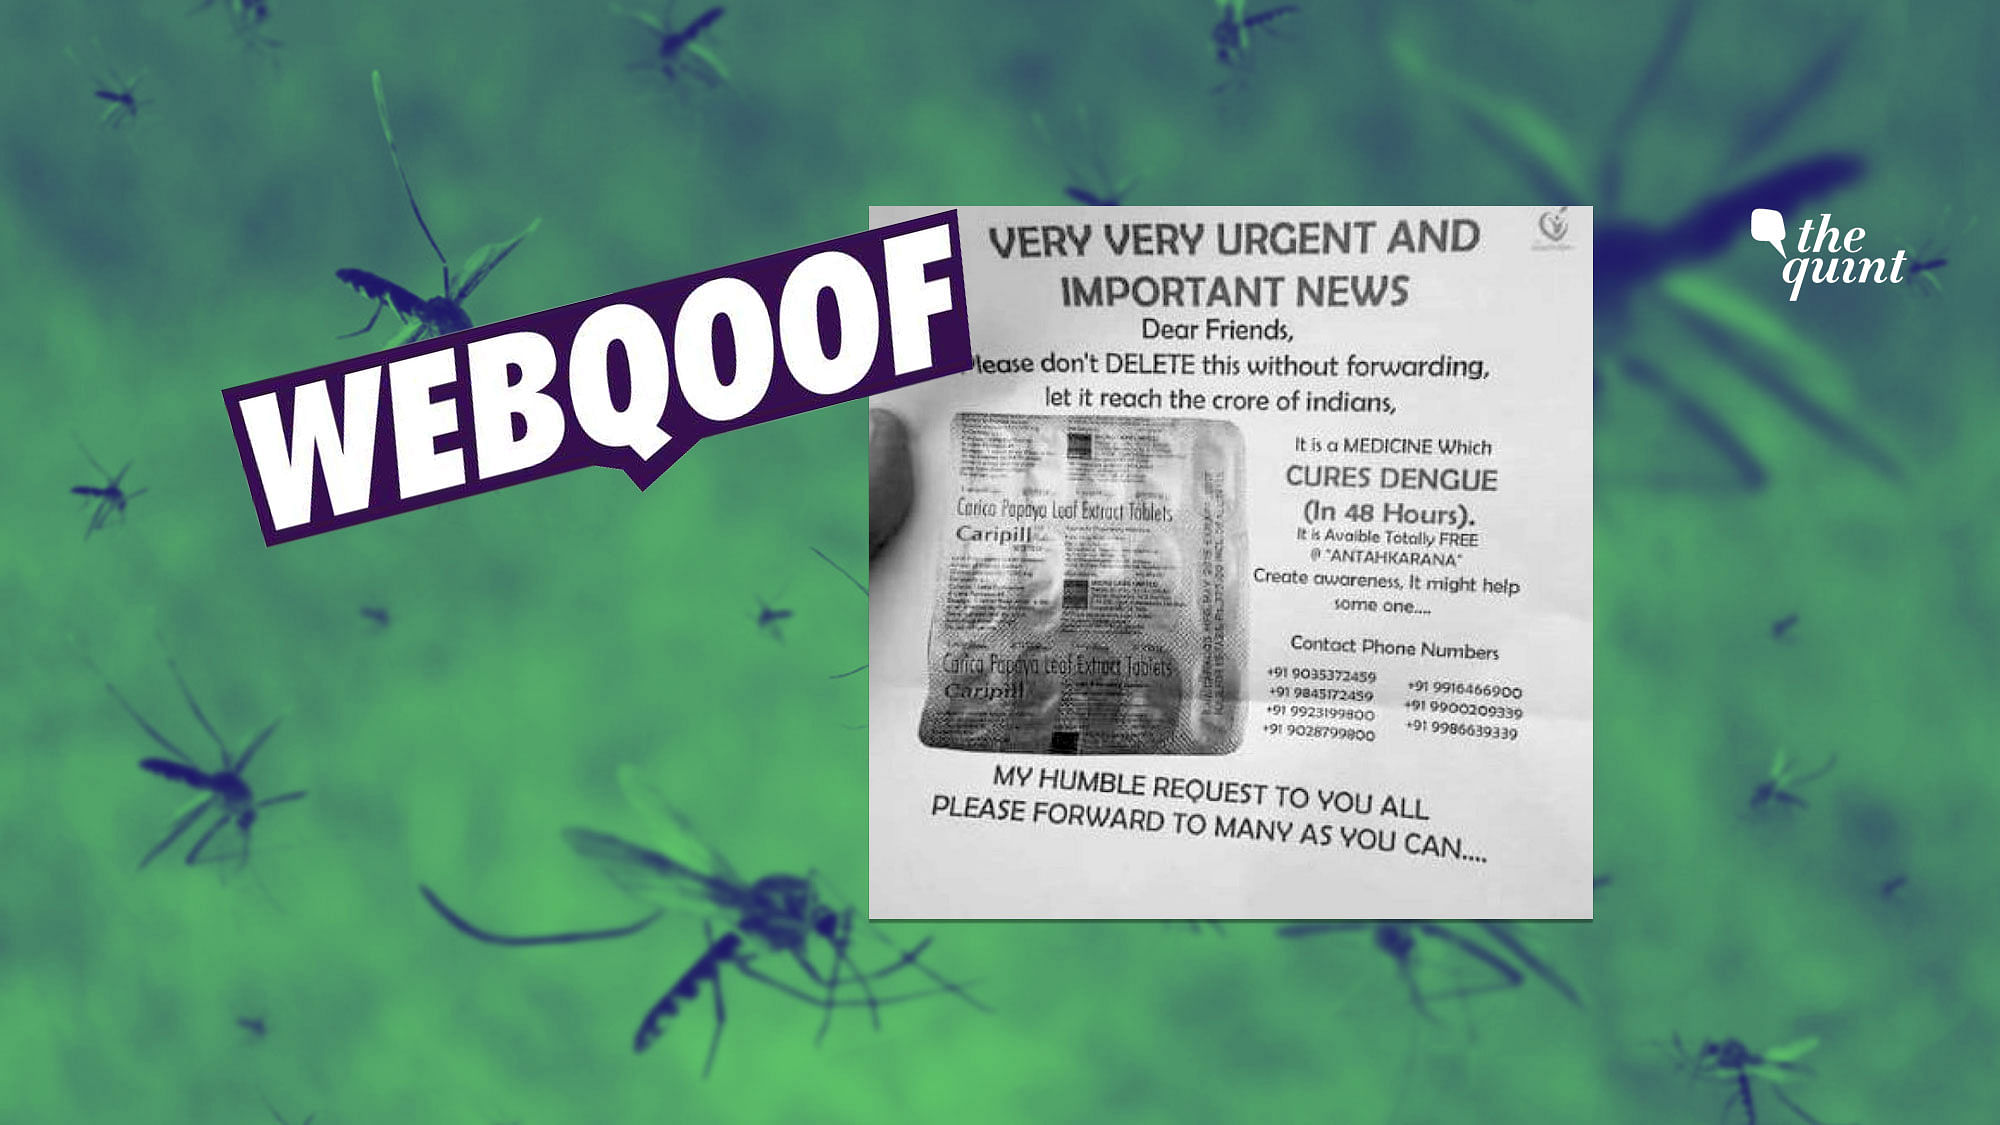 Is there a miracle medicine that cures dengue in just 48 hours? Read FIT Webqoof to find out.